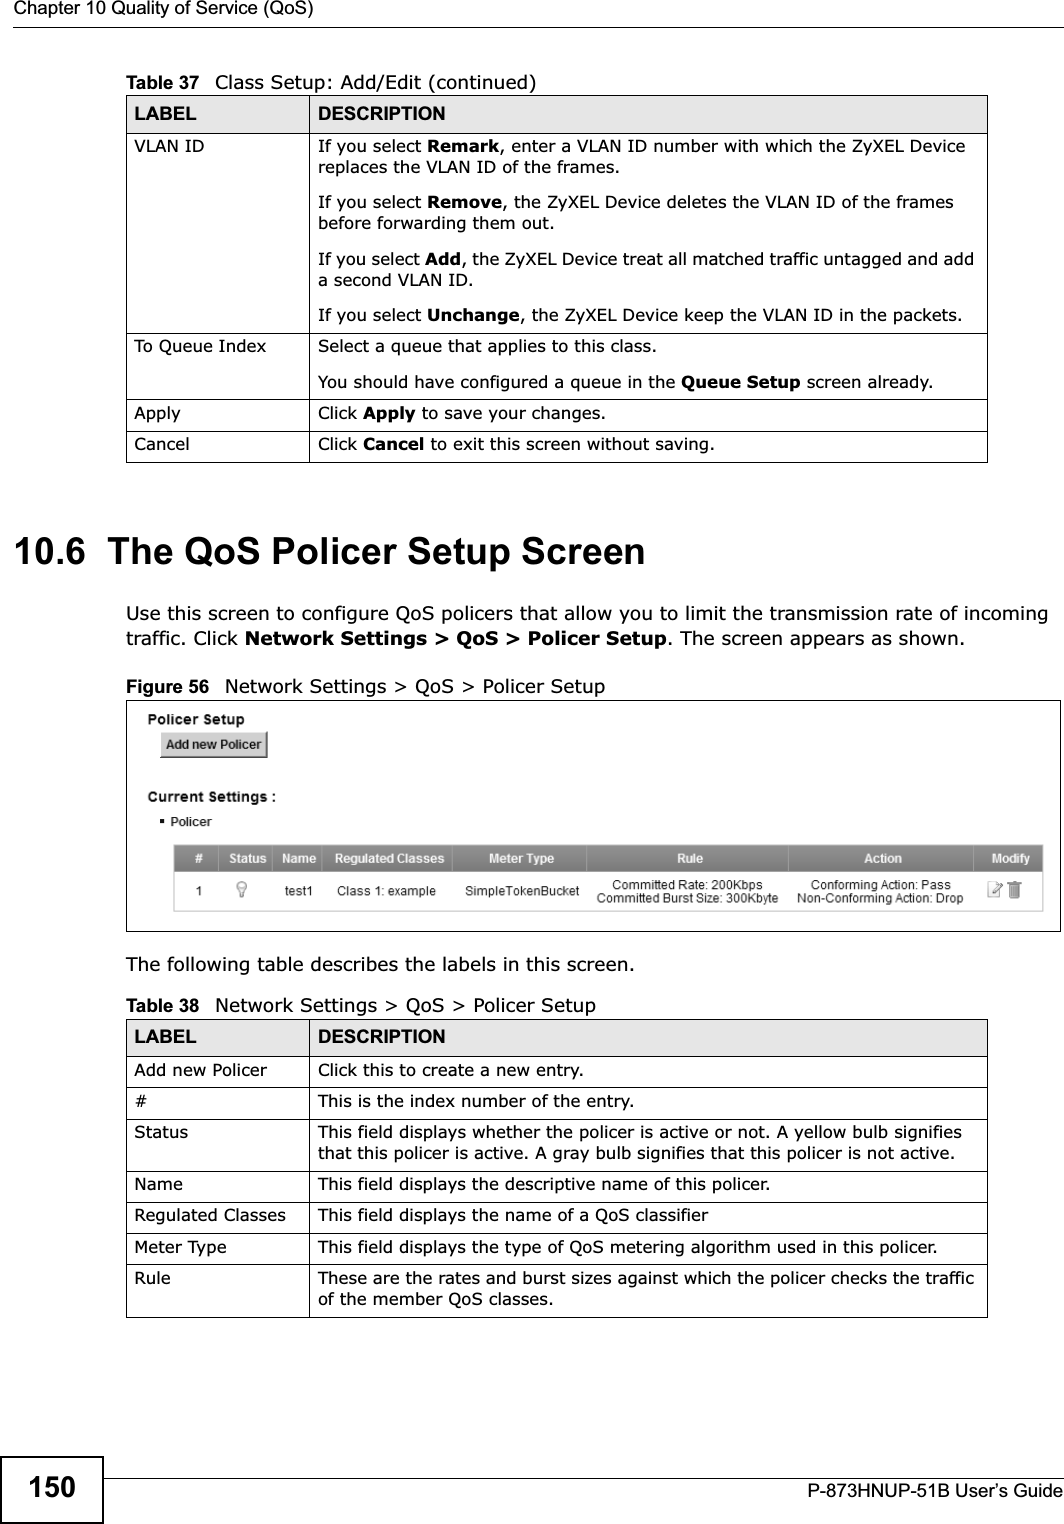 Chapter 10 Quality of Service (QoS)P-873HNUP-51B User’s Guide15010.6  The QoS Policer Setup ScreenUse this screen to configure QoS policers that allow you to limit the transmission rate of incoming traffic. Click Network Settings &gt; QoS &gt; Policer Setup. The screen appears as shown. Figure 56   Network Settings &gt; QoS &gt; Policer Setup The following table describes the labels in this screen.  VLAN ID If you select Remark, enter a VLAN ID number with which the ZyXEL Device replaces the VLAN ID of the frames.If you select Remove, the ZyXEL Device deletes the VLAN ID of the frames before forwarding them out.If you select Add, the ZyXEL Device treat all matched traffic untagged and add a second VLAN ID.If you select Unchange, the ZyXEL Device keep the VLAN ID in the packets.To Queue Index Select a queue that applies to this class.You should have configured a queue in the Queue Setup screen already.Apply Click Apply to save your changes.Cancel Click Cancel to exit this screen without saving.Table 37   Class Setup: Add/Edit (continued)LABEL DESCRIPTIONTable 38   Network Settings &gt; QoS &gt; Policer SetupLABEL DESCRIPTIONAdd new Policer Click this to create a new entry.#This is the index number of the entry.Status This field displays whether the policer is active or not. A yellow bulb signifies that this policer is active. A gray bulb signifies that this policer is not active.Name This field displays the descriptive name of this policer.Regulated Classes This field displays the name of a QoS classifierMeter Type This field displays the type of QoS metering algorithm used in this policer.Rule These are the rates and burst sizes against which the policer checks the traffic of the member QoS classes.